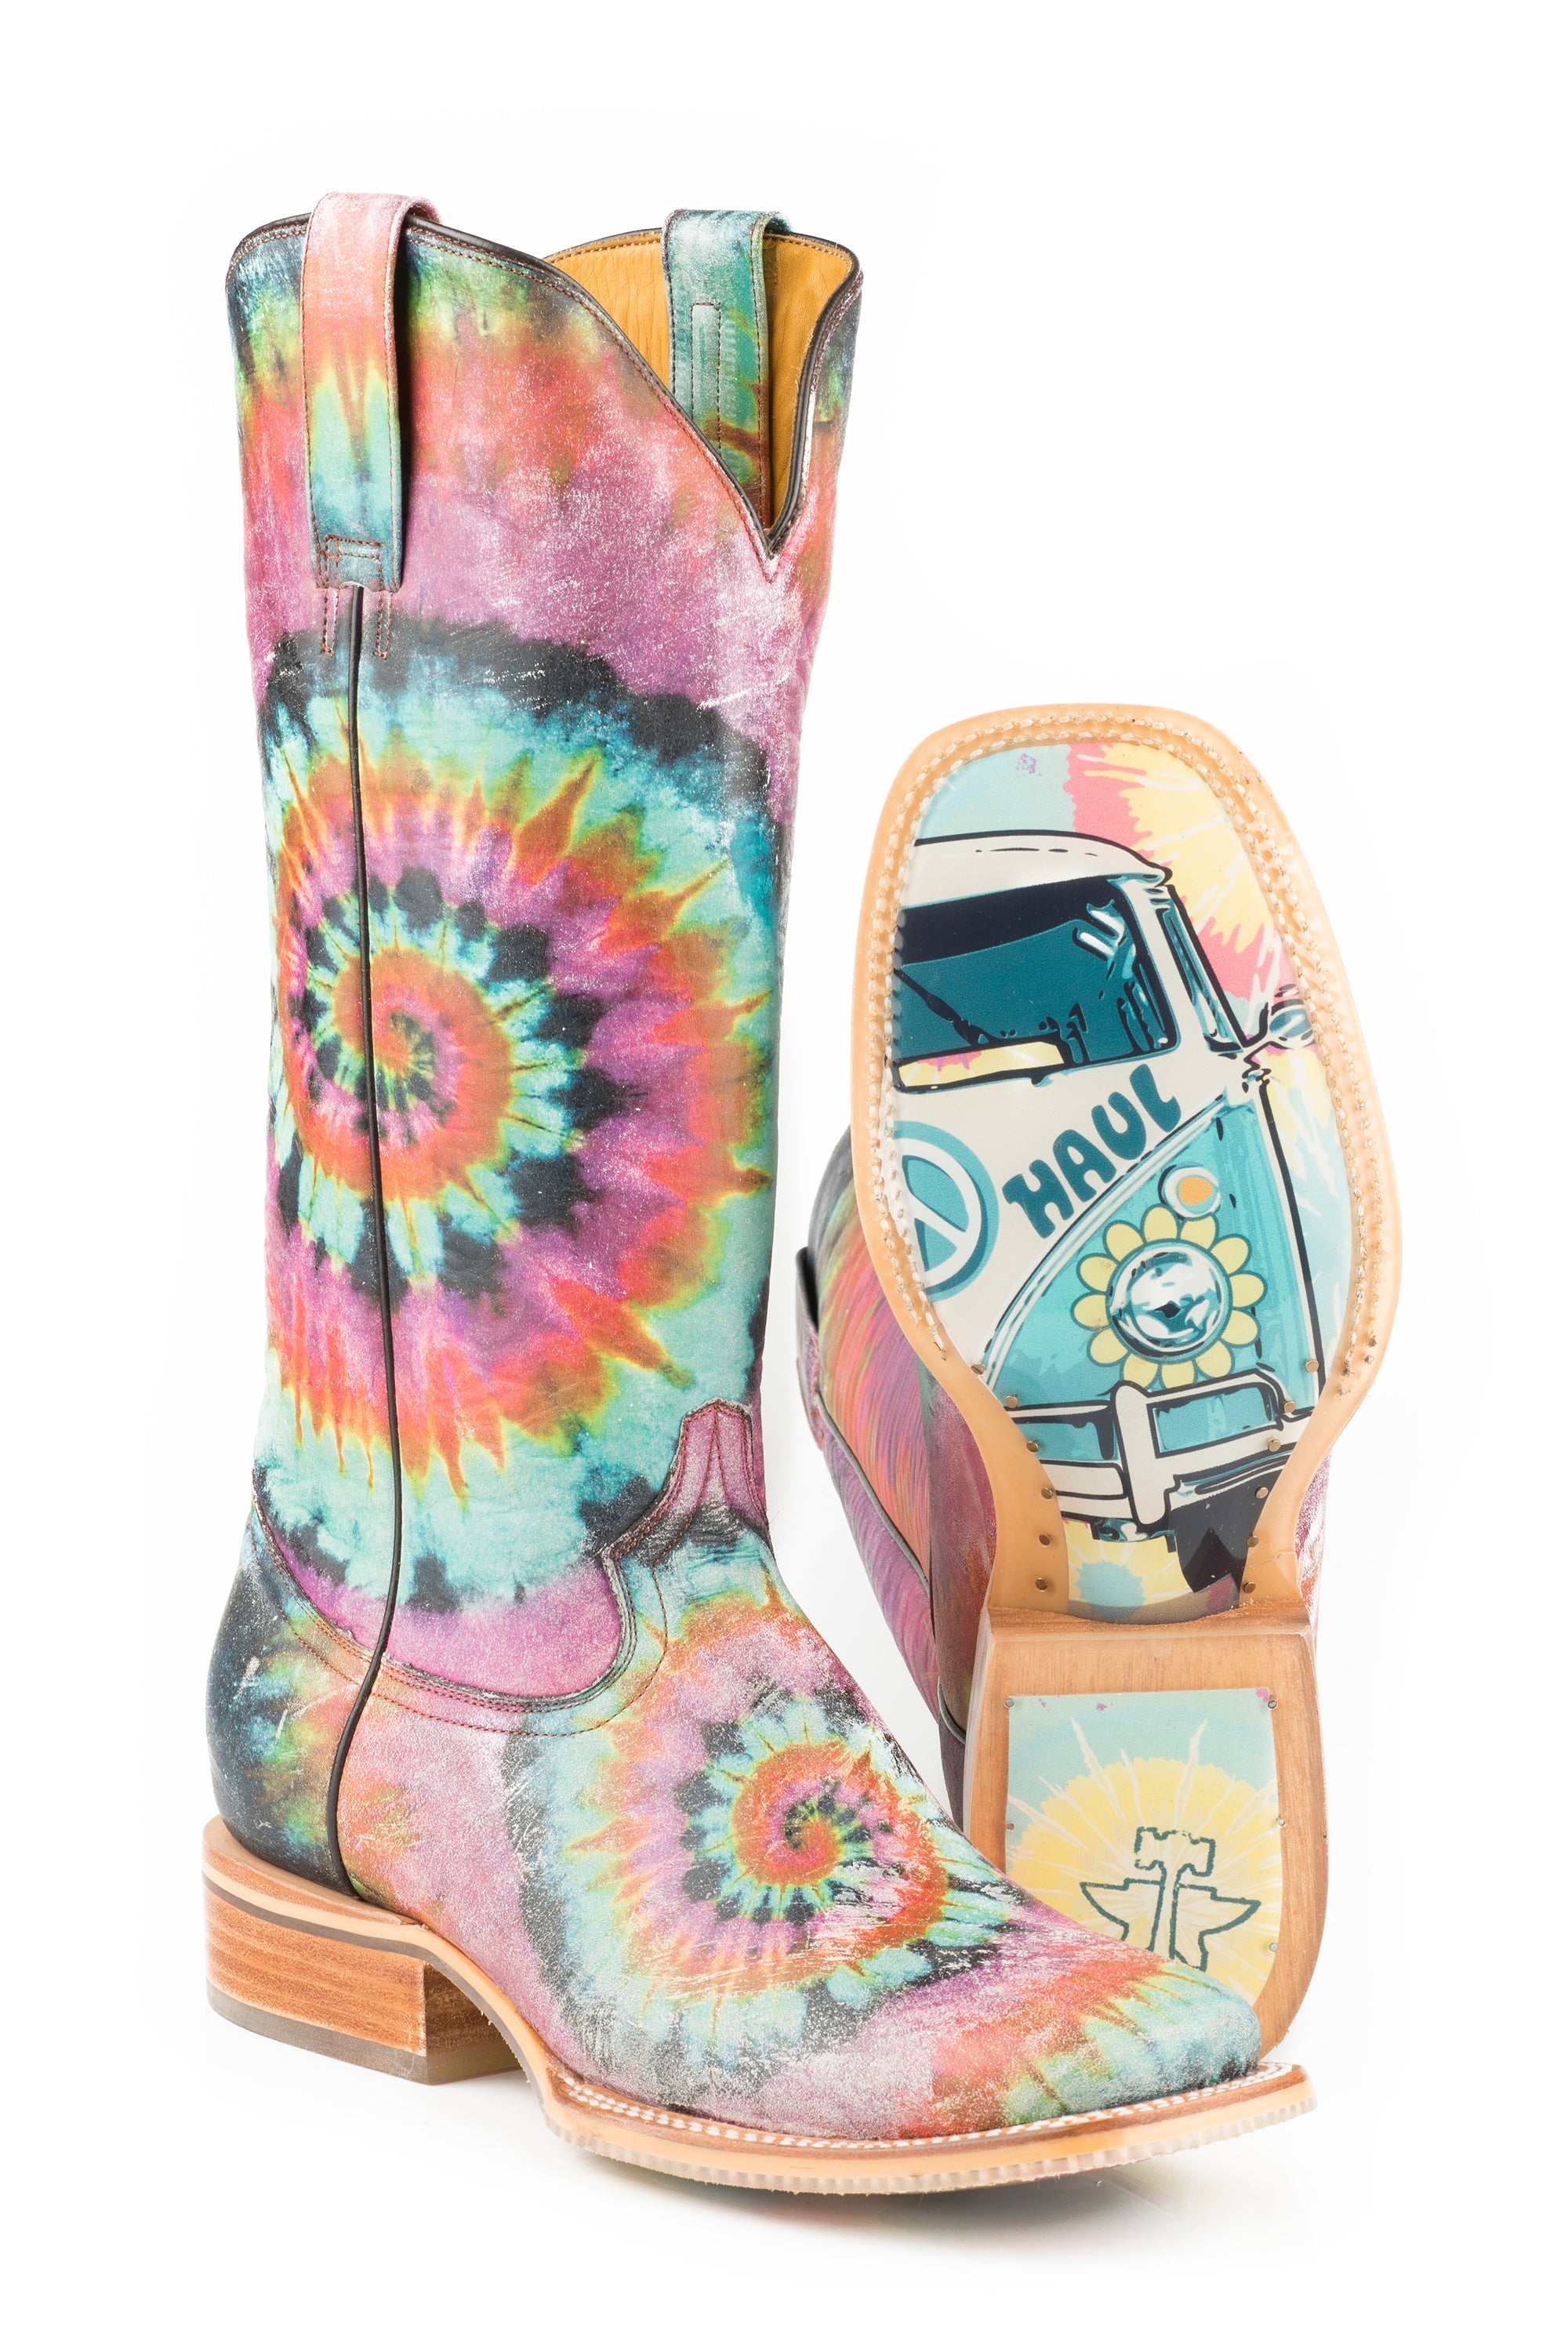 Tin Haul WOMENS GROOVY WITH TIE DYE CAMPER SOLE